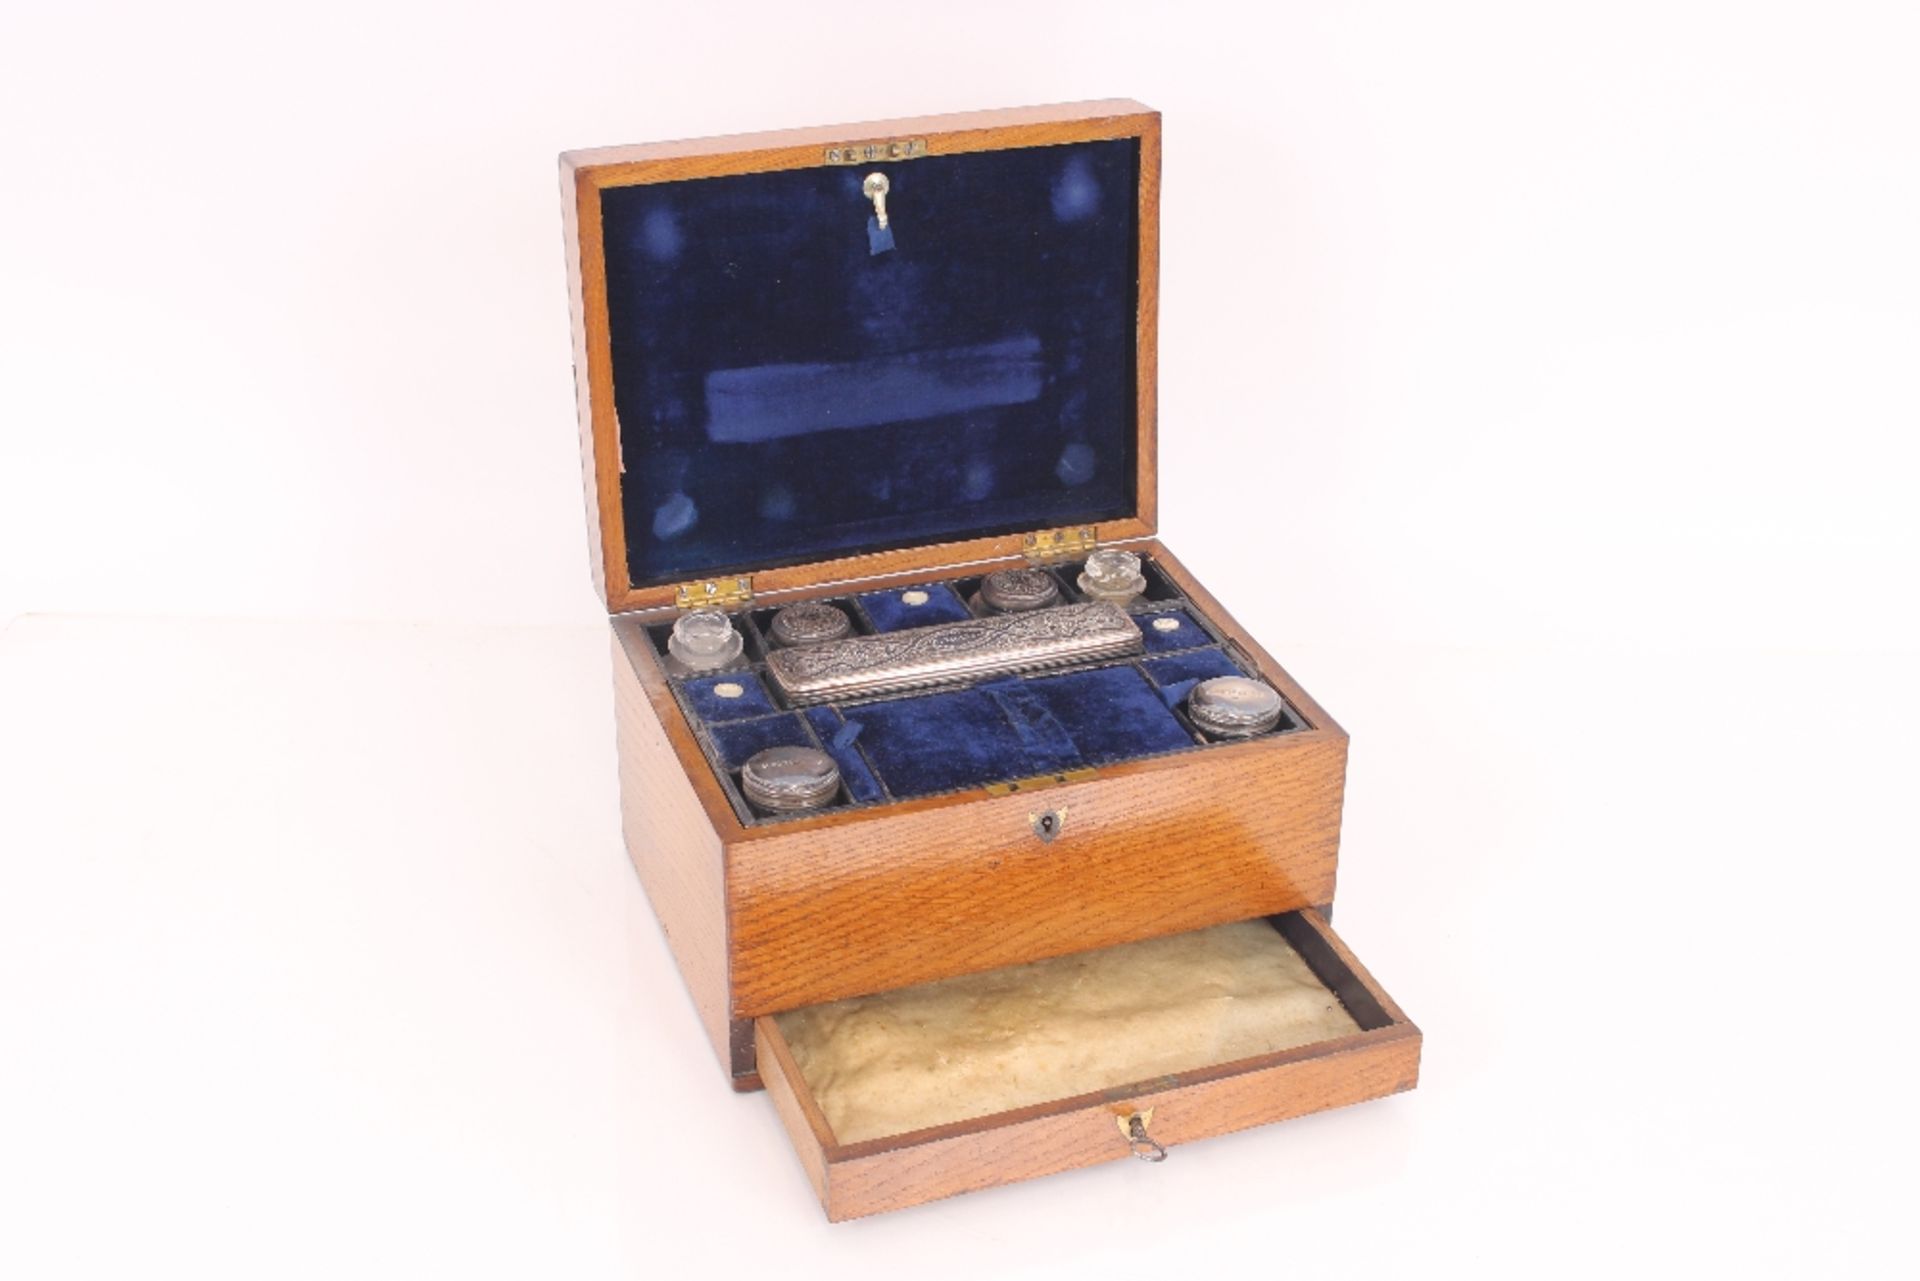 A 19th century golden oak, cased vanity box containing various bottles and tidy jars with foliate